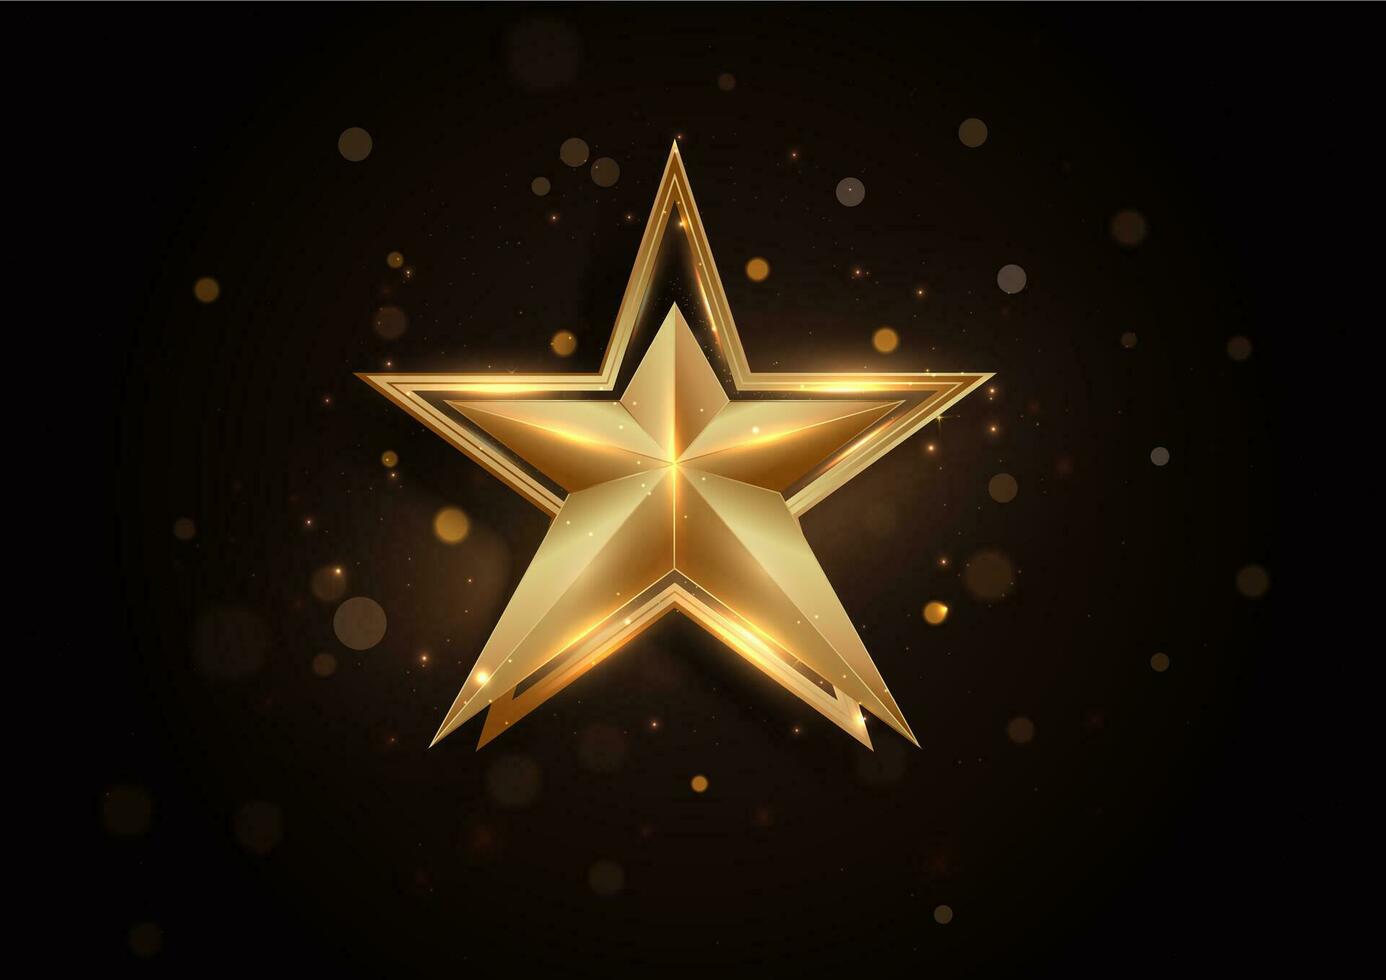 3D golden star with golden on dark brown background with lighting effect and sparkle. Luxury template celebration award design. vector